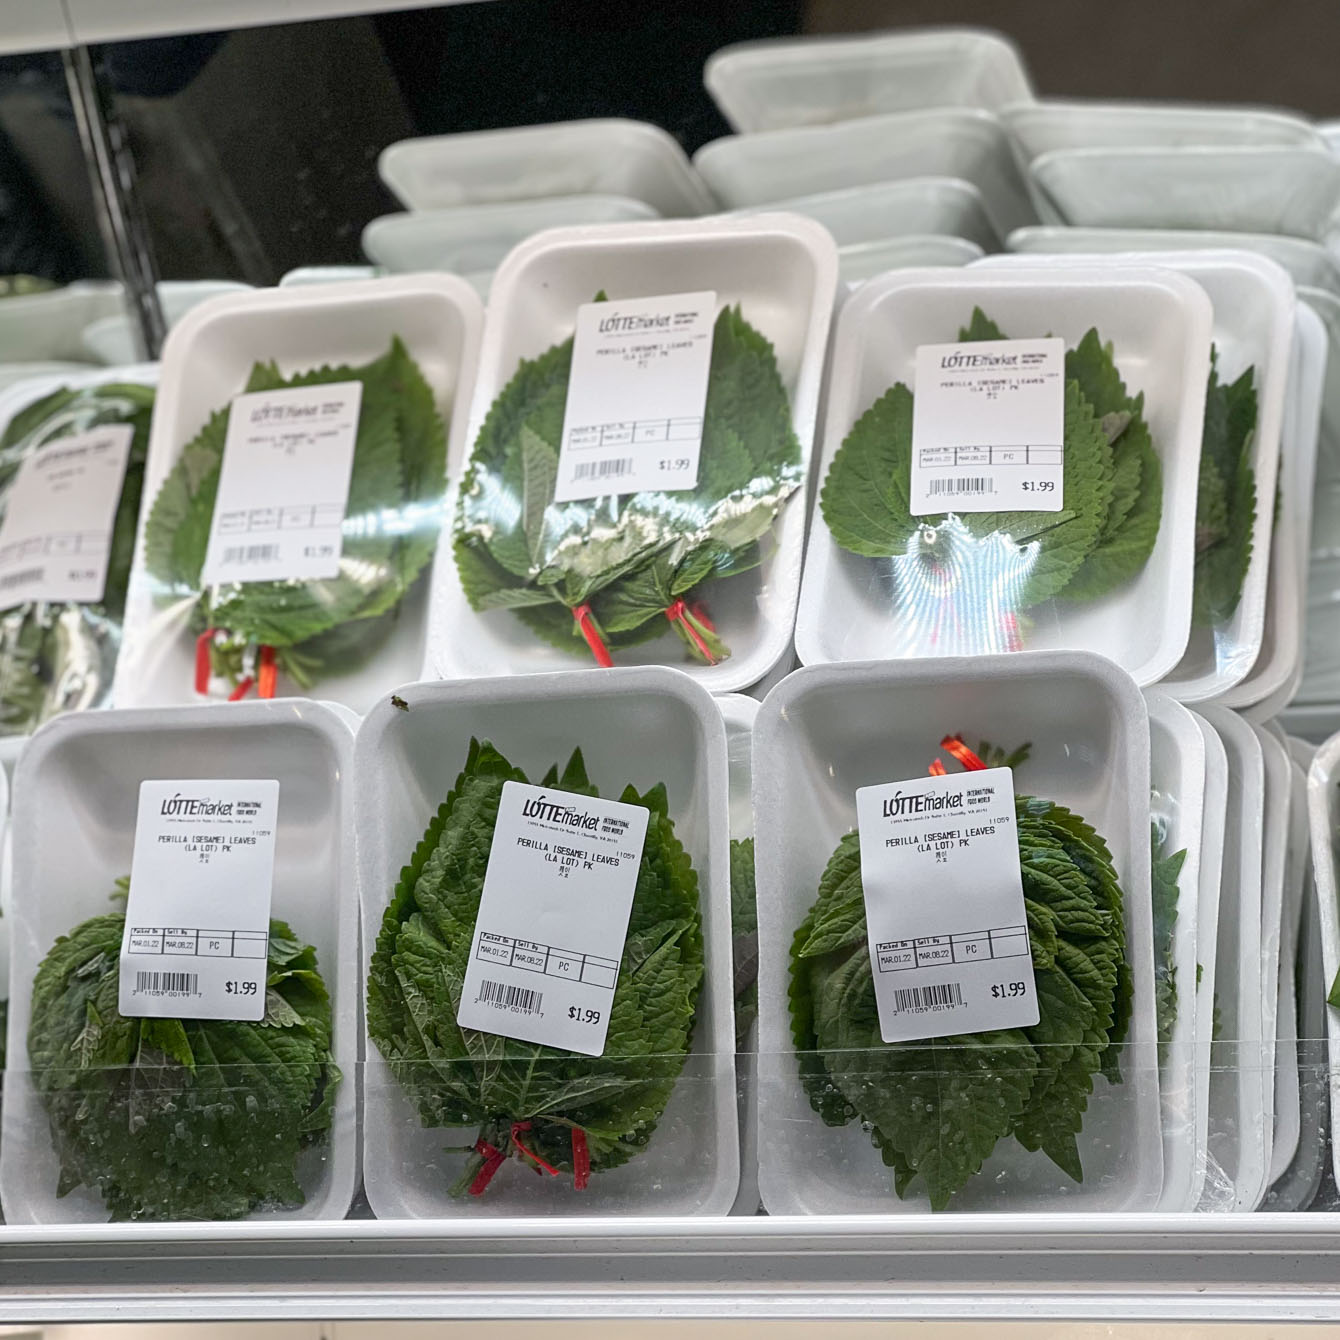 Packaged perilla leaves are displayed on the shelf.